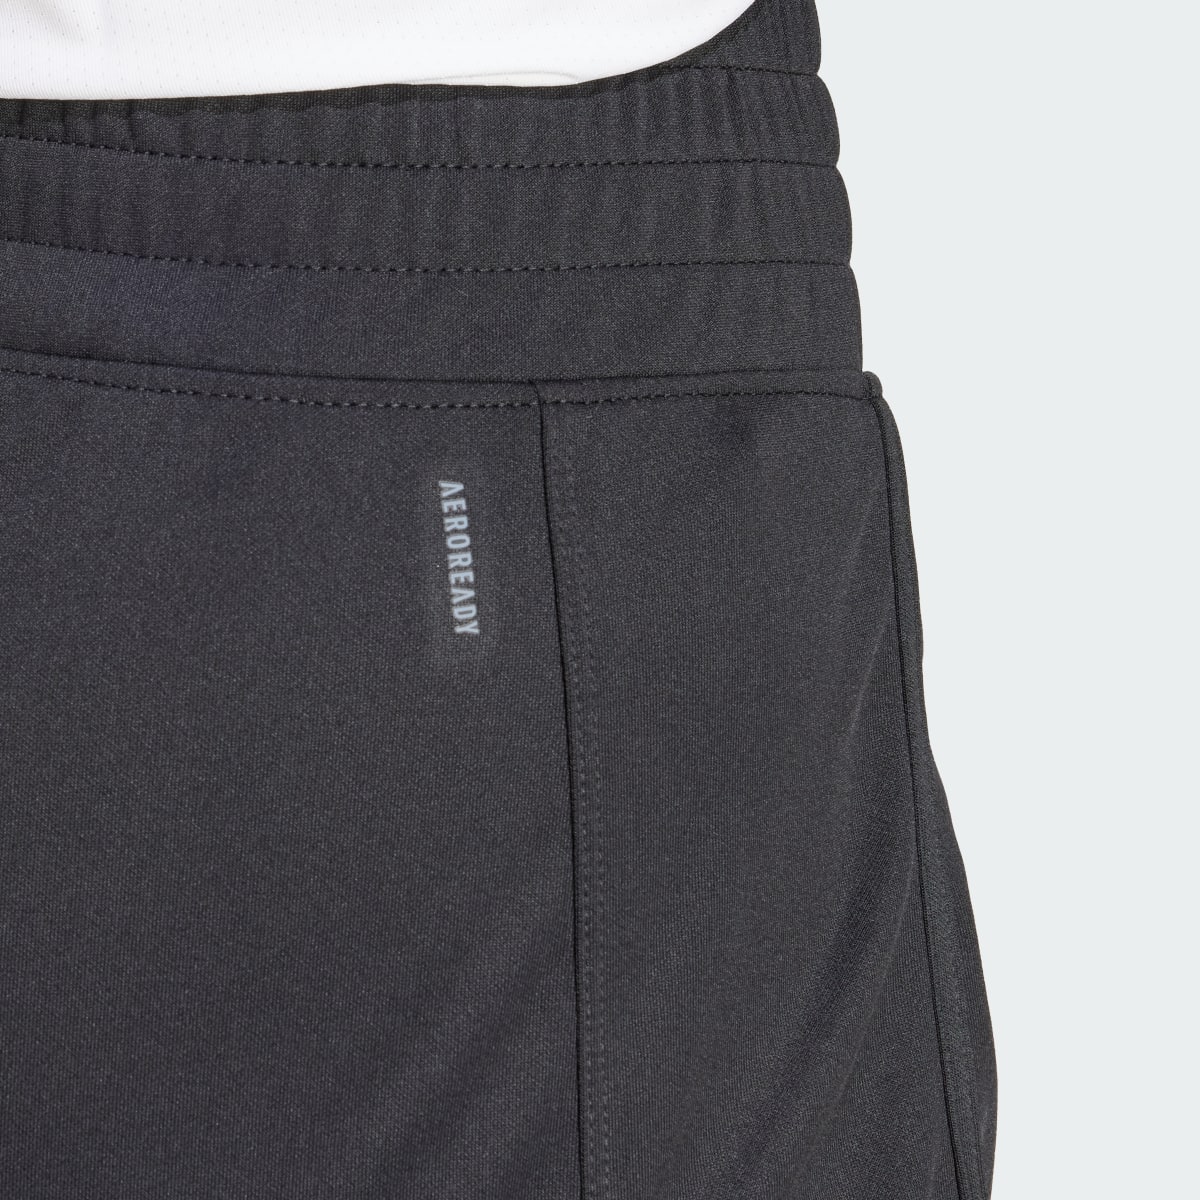 Adidas Pacer Essentials Knit High-Rise Shorts. 5